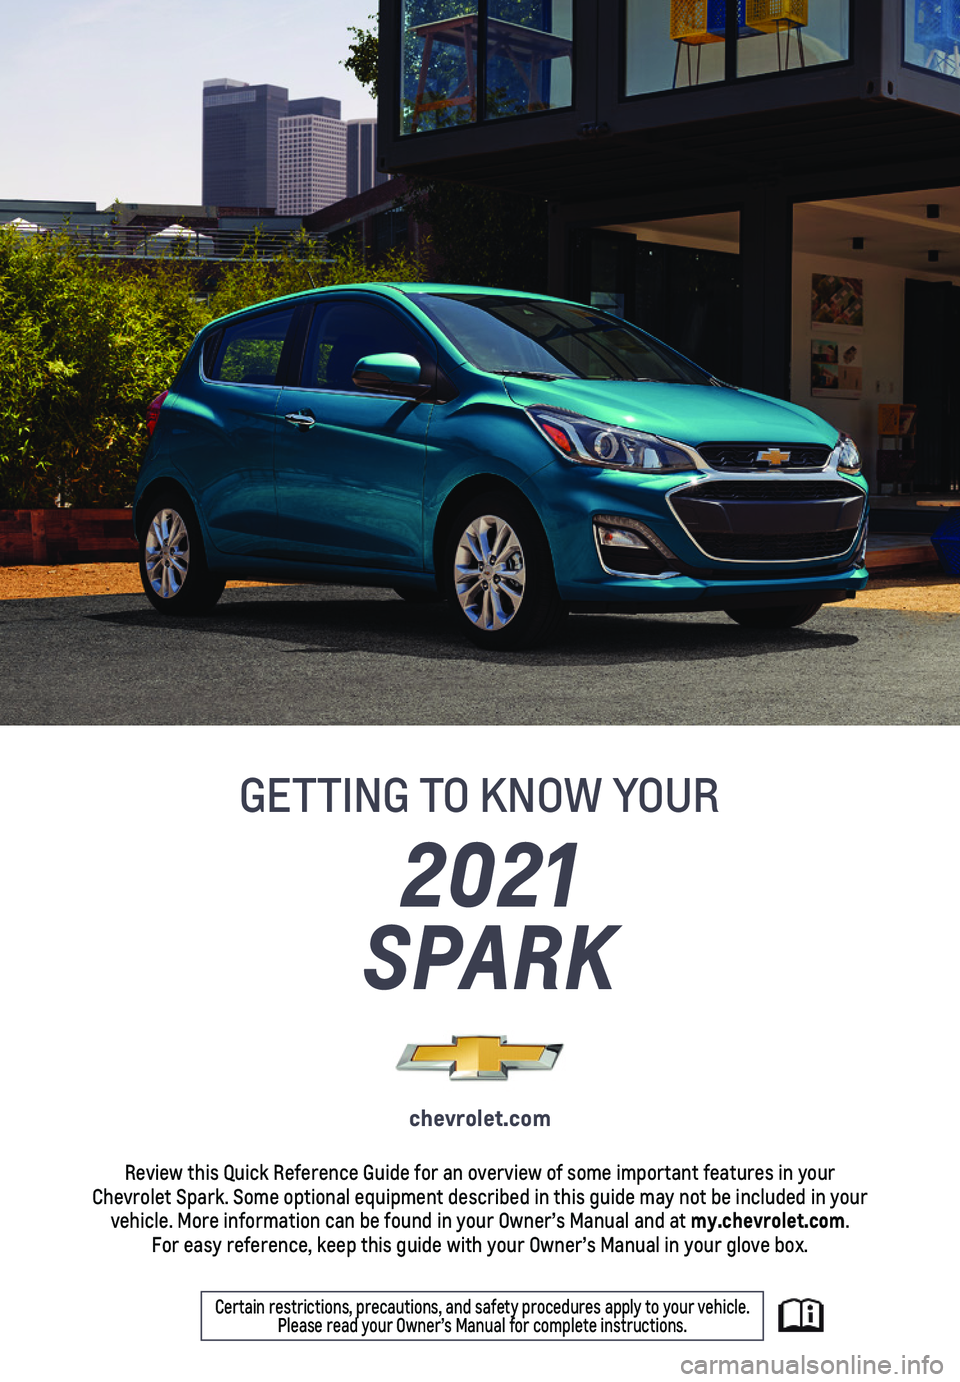 CHEVROLET SPARK 2021  Get To Know Guide 1
2021 
SPARK
GETTING TO KNOW YOUR
chevrolet.com
Review this Quick Reference Guide for an overview of some important feat\
ures in your  Chevrolet Spark. Some optional equipment described in this guid